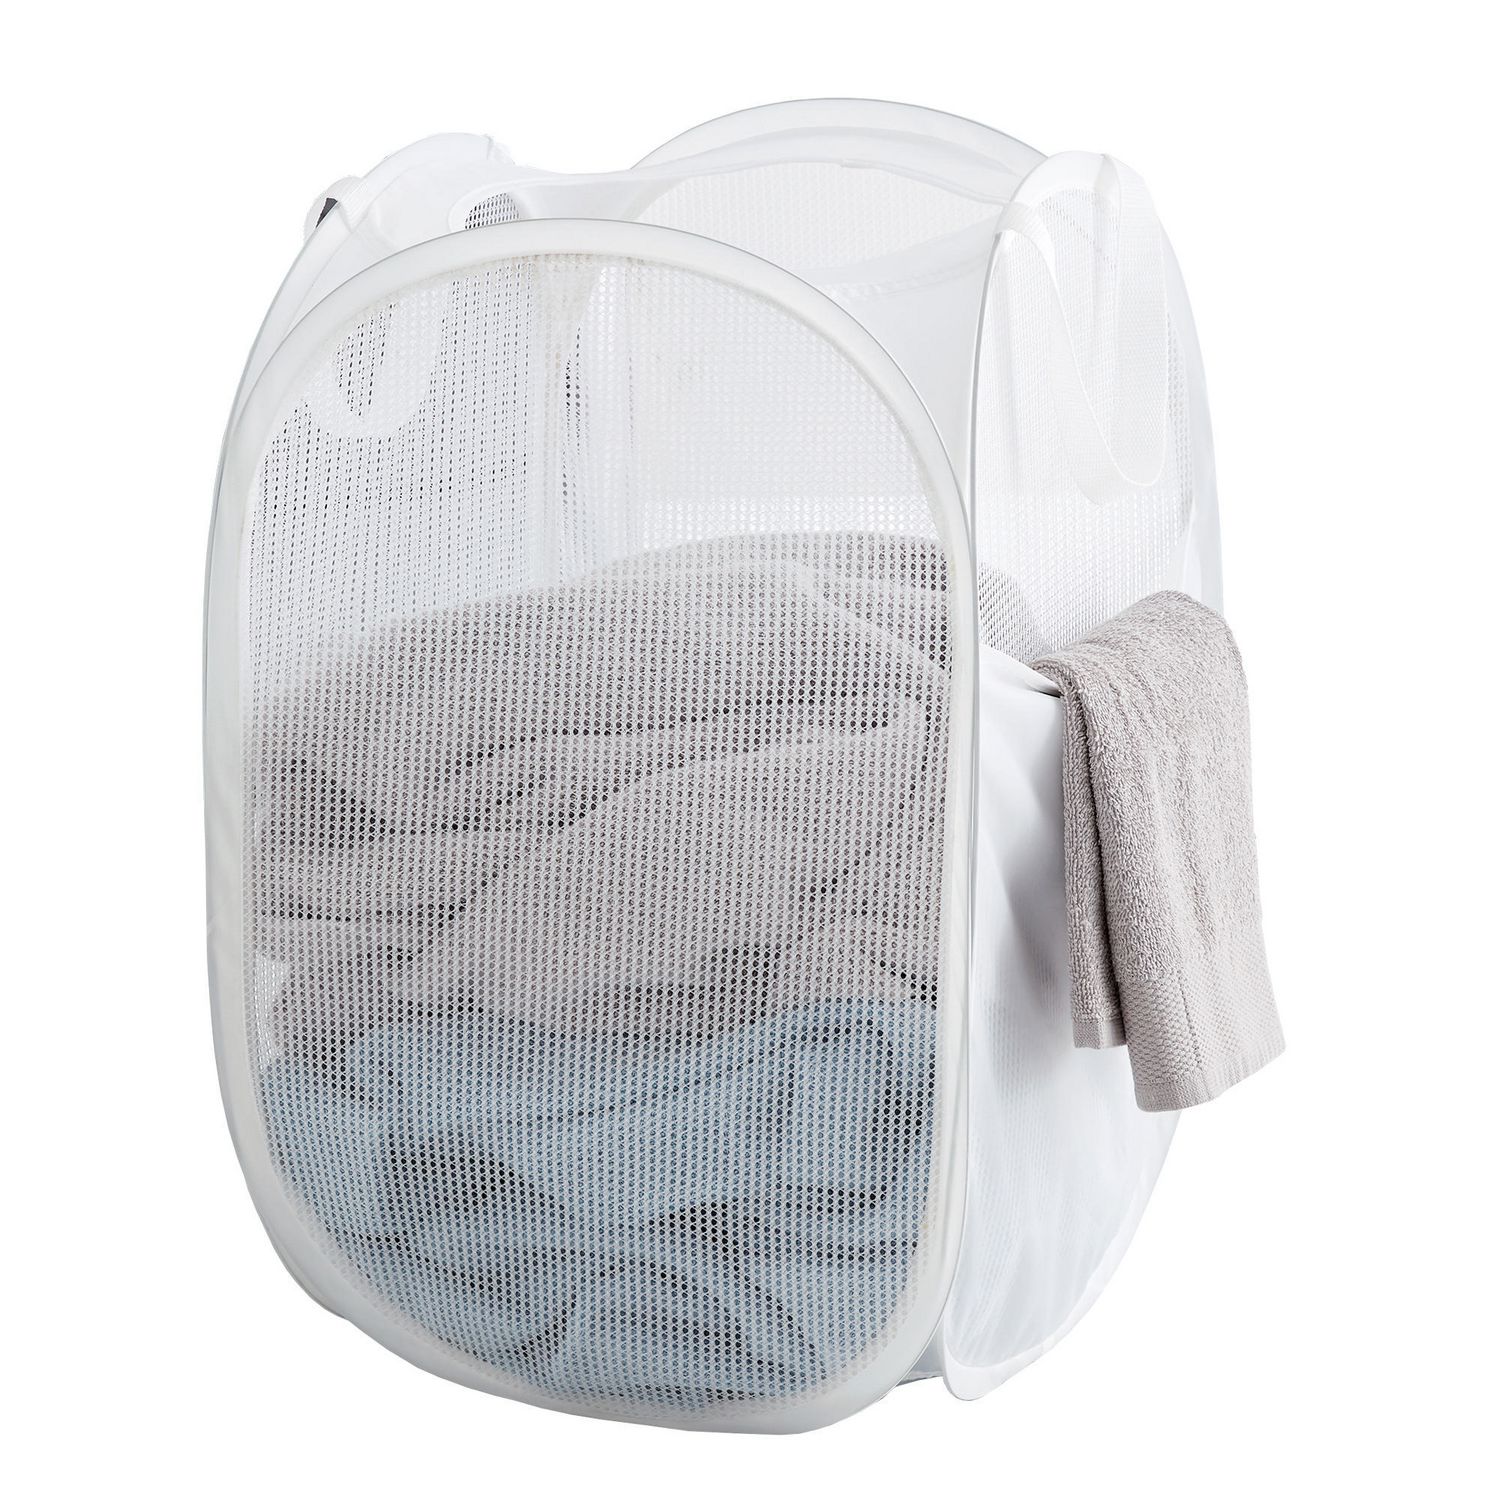 Whitmor Mesh Pop and Fold Laundry Basket - White, 1 ct - Foods Co.